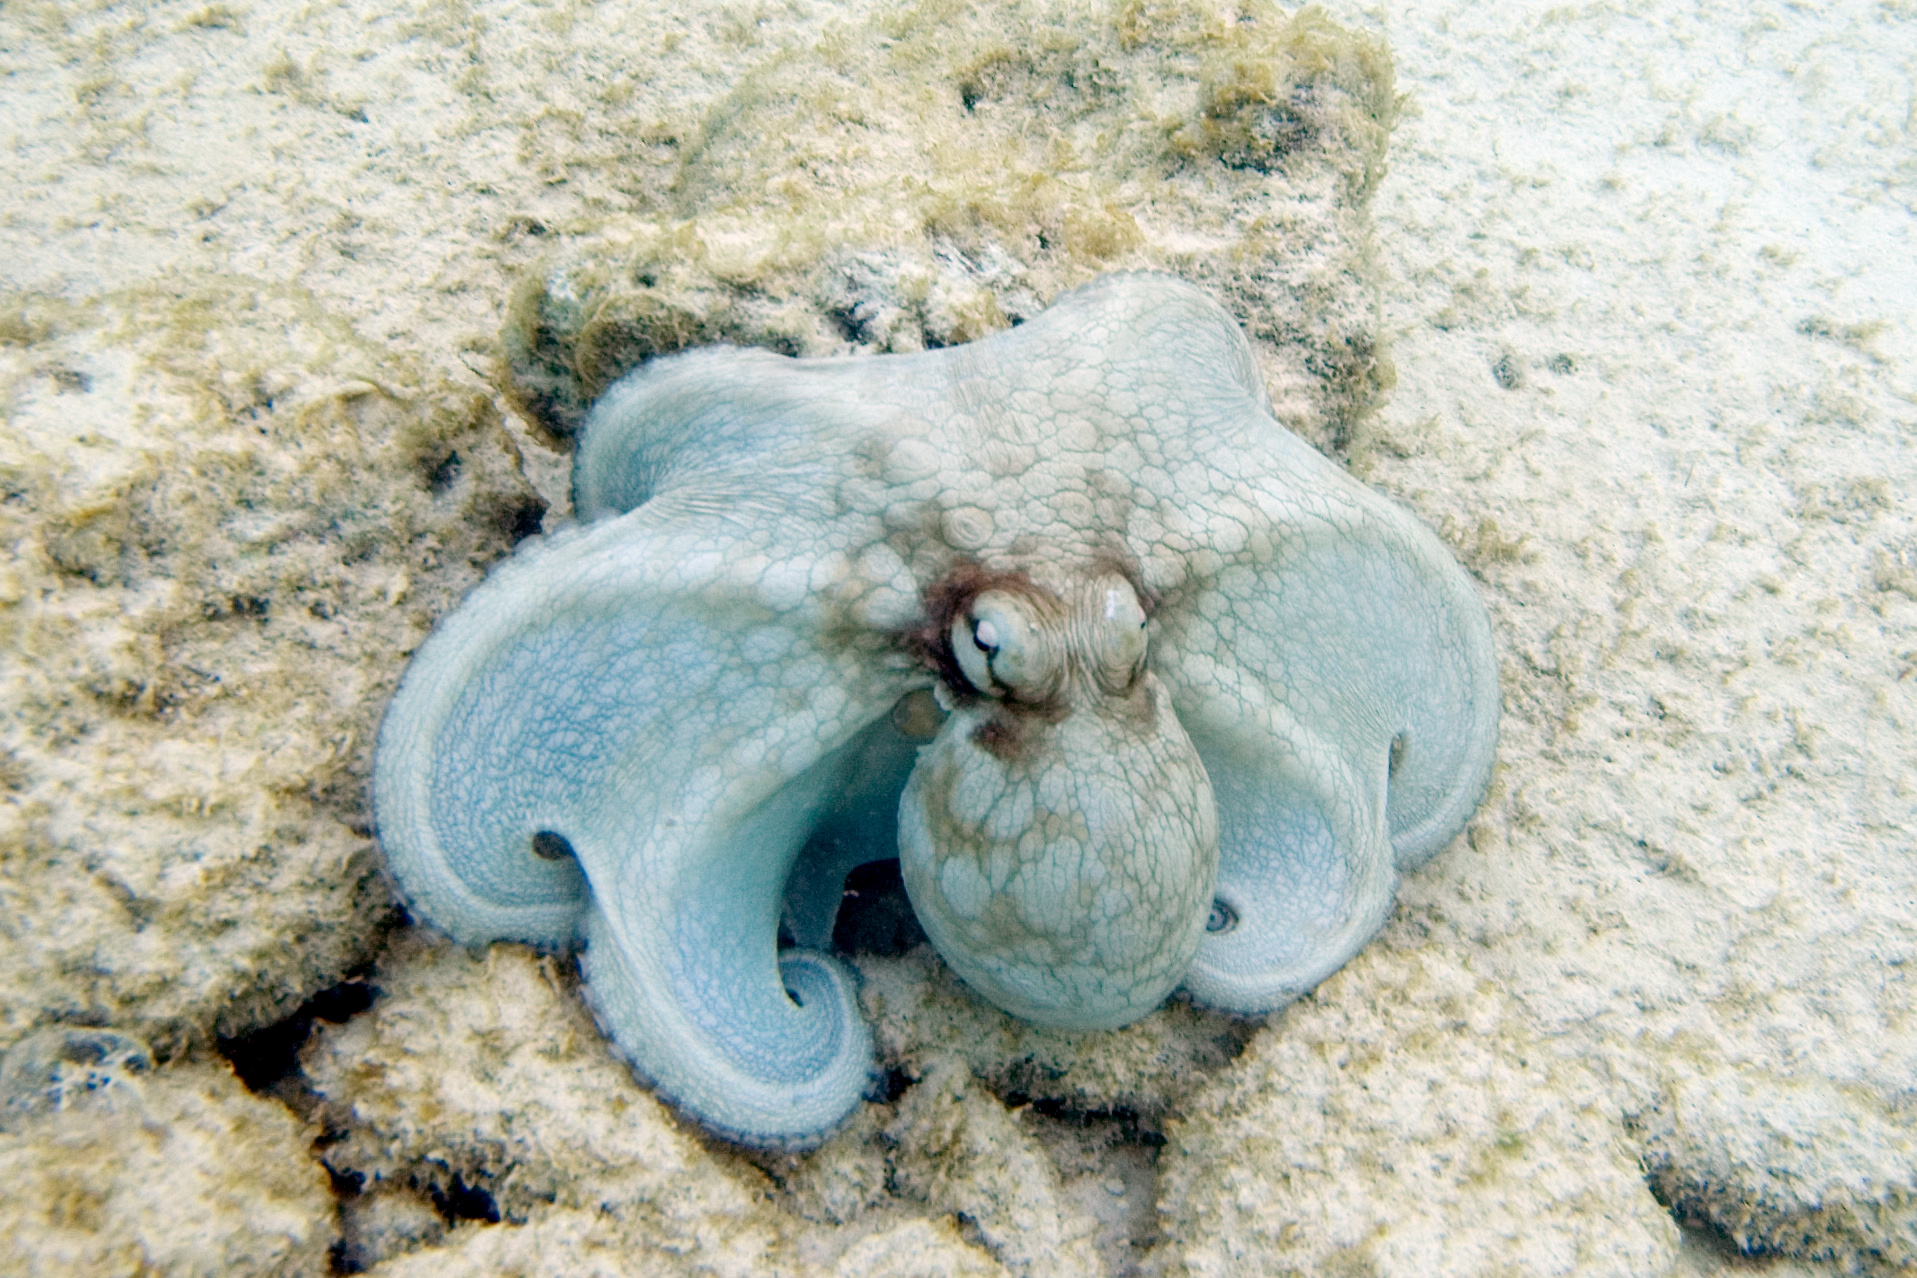 What Are The Predators Of The Dumbo Octopus